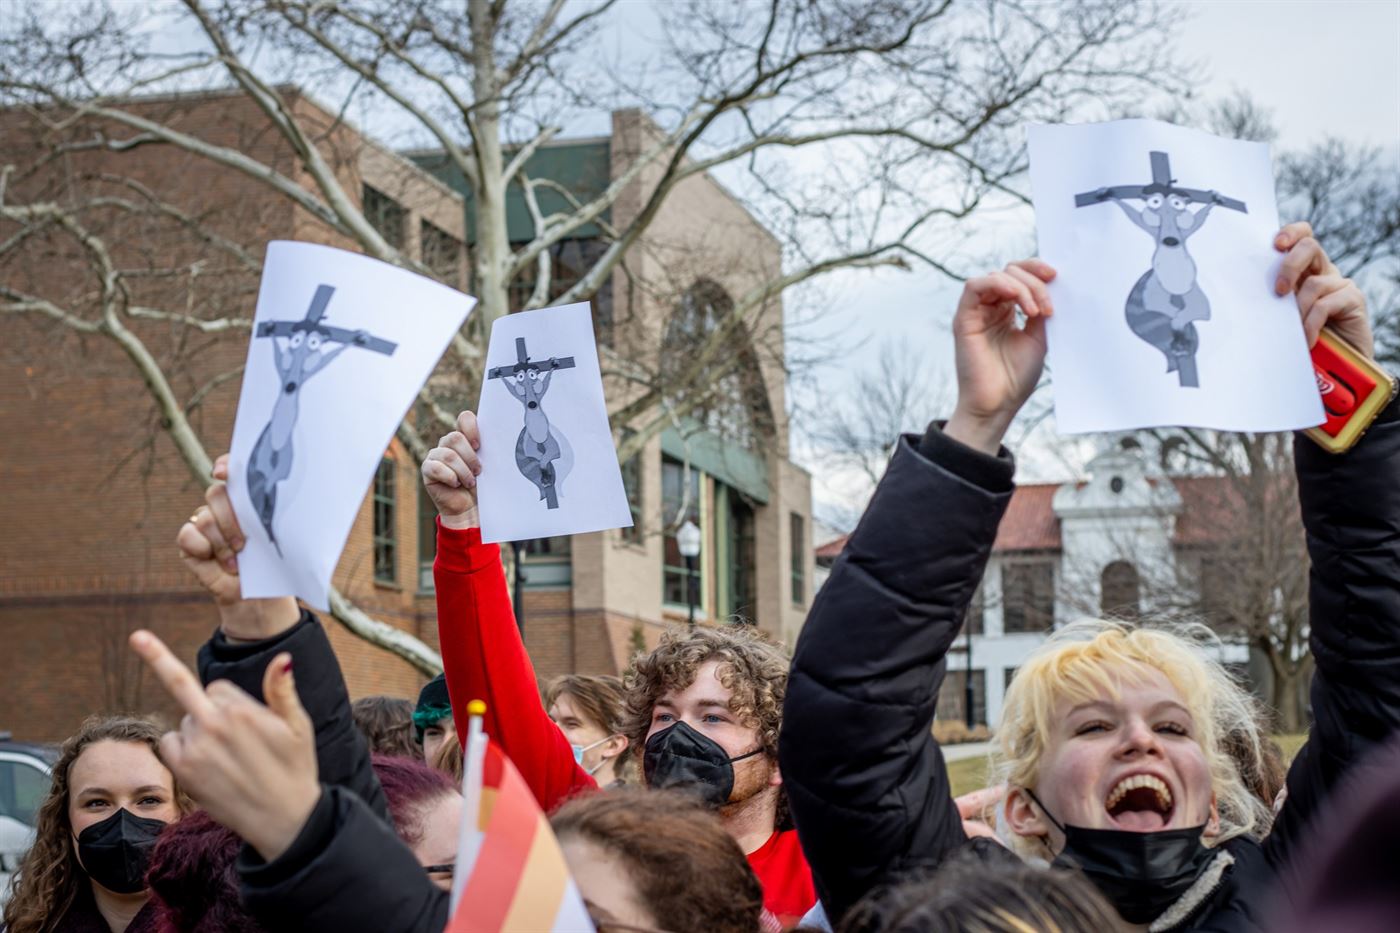 Students holding up a picture of Scrat from “Ice Age” crucified to a cross mocking Pastor Aden and the David Christian Center. John LaRosa | The Montclarion